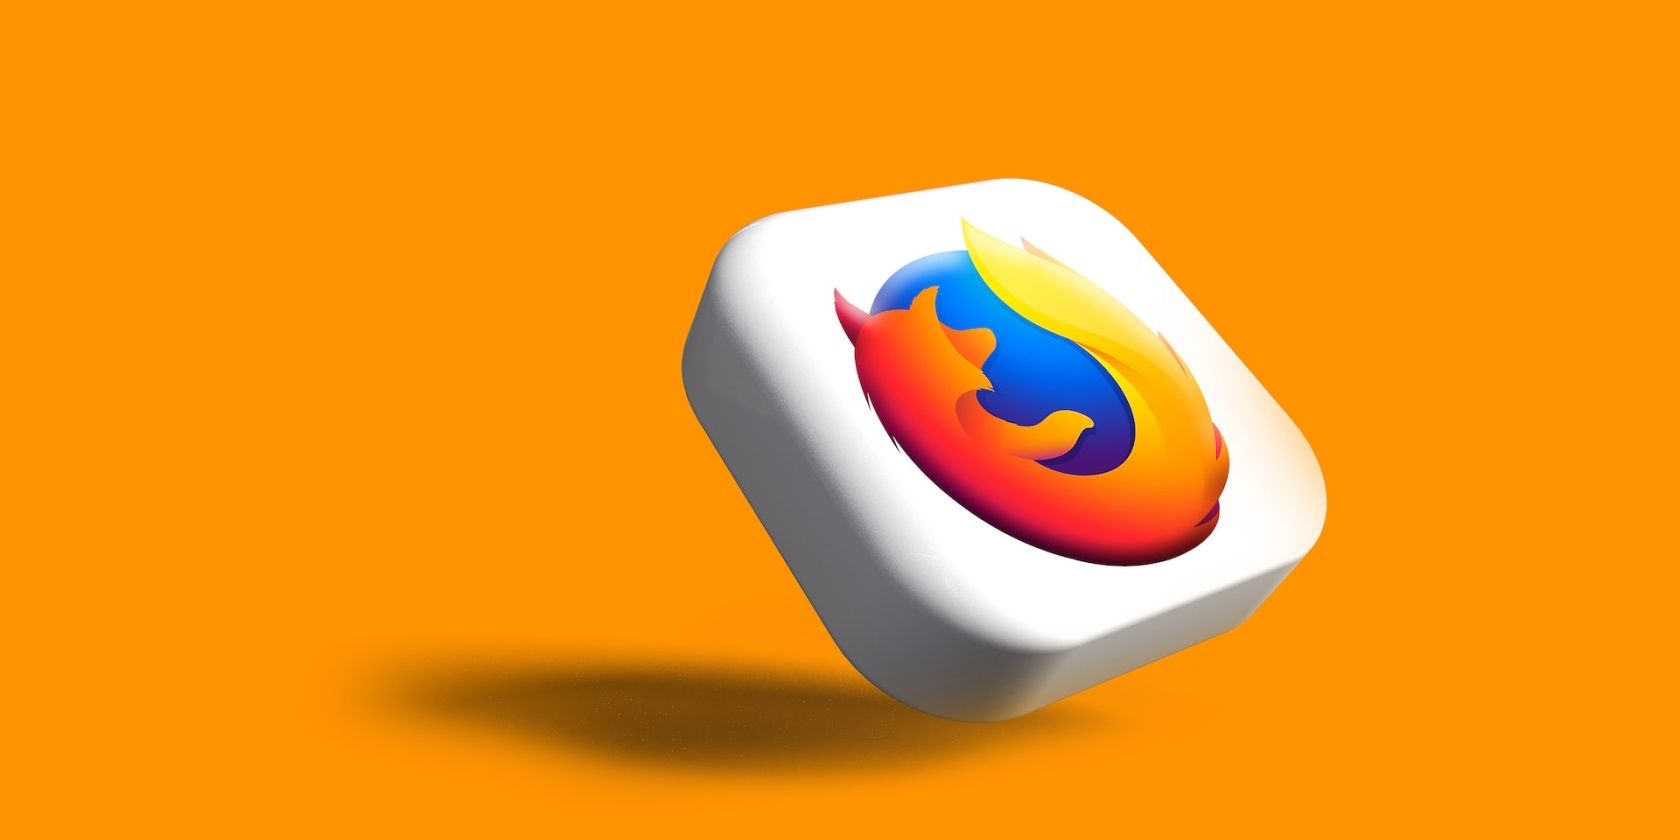 Firefox logo on a white square block